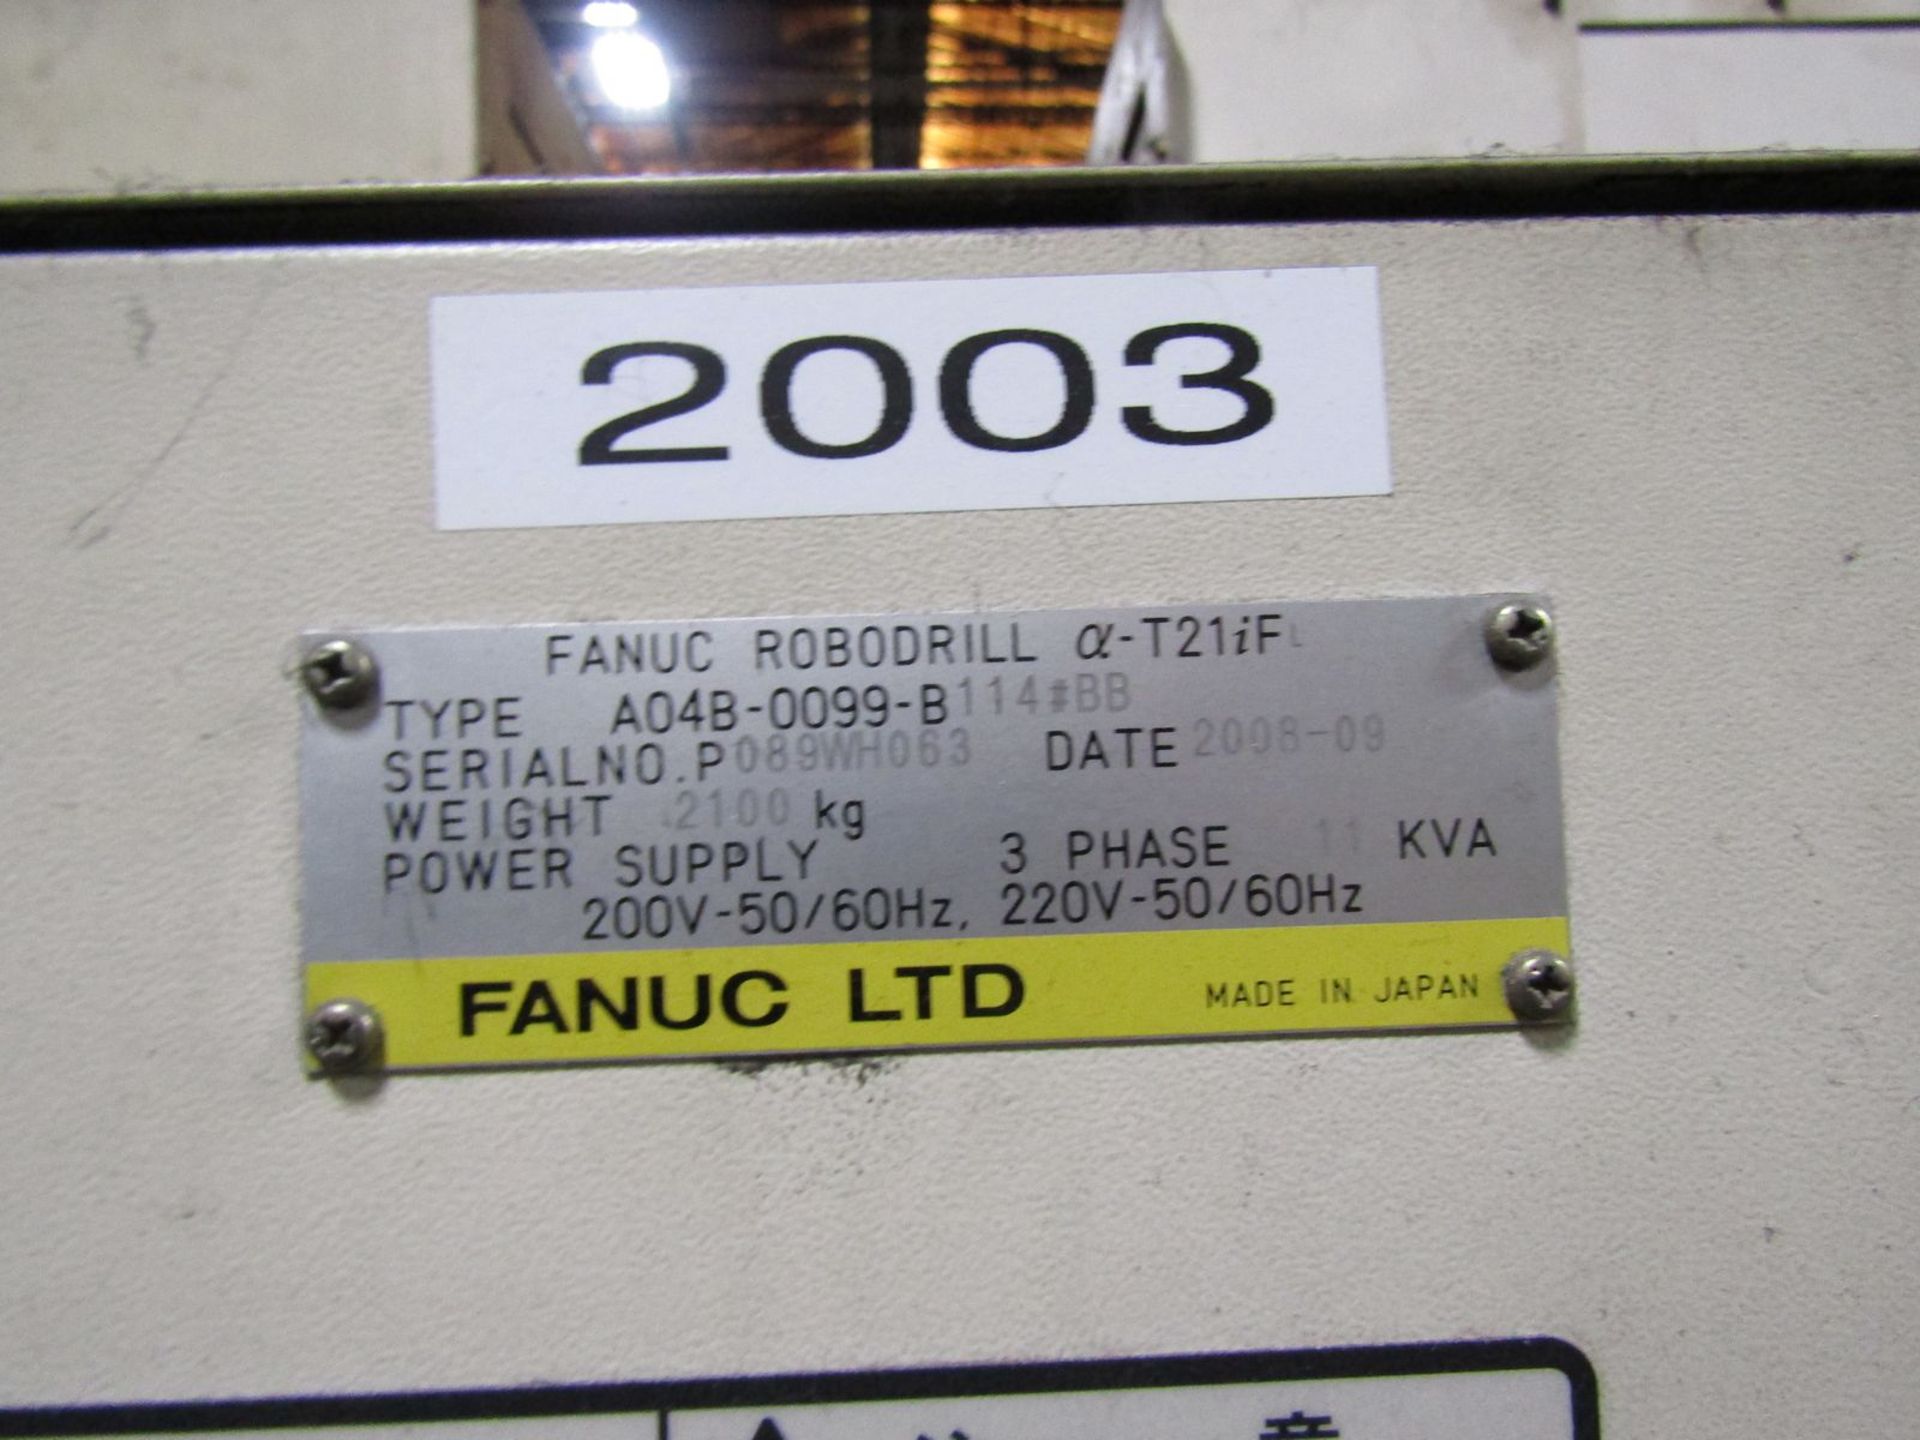 Fanuc Robodrill Alpha-T21iFL Type A04B-0099-B114-BB CNC Drilling and Tapping Center, S/N: - Image 6 of 9